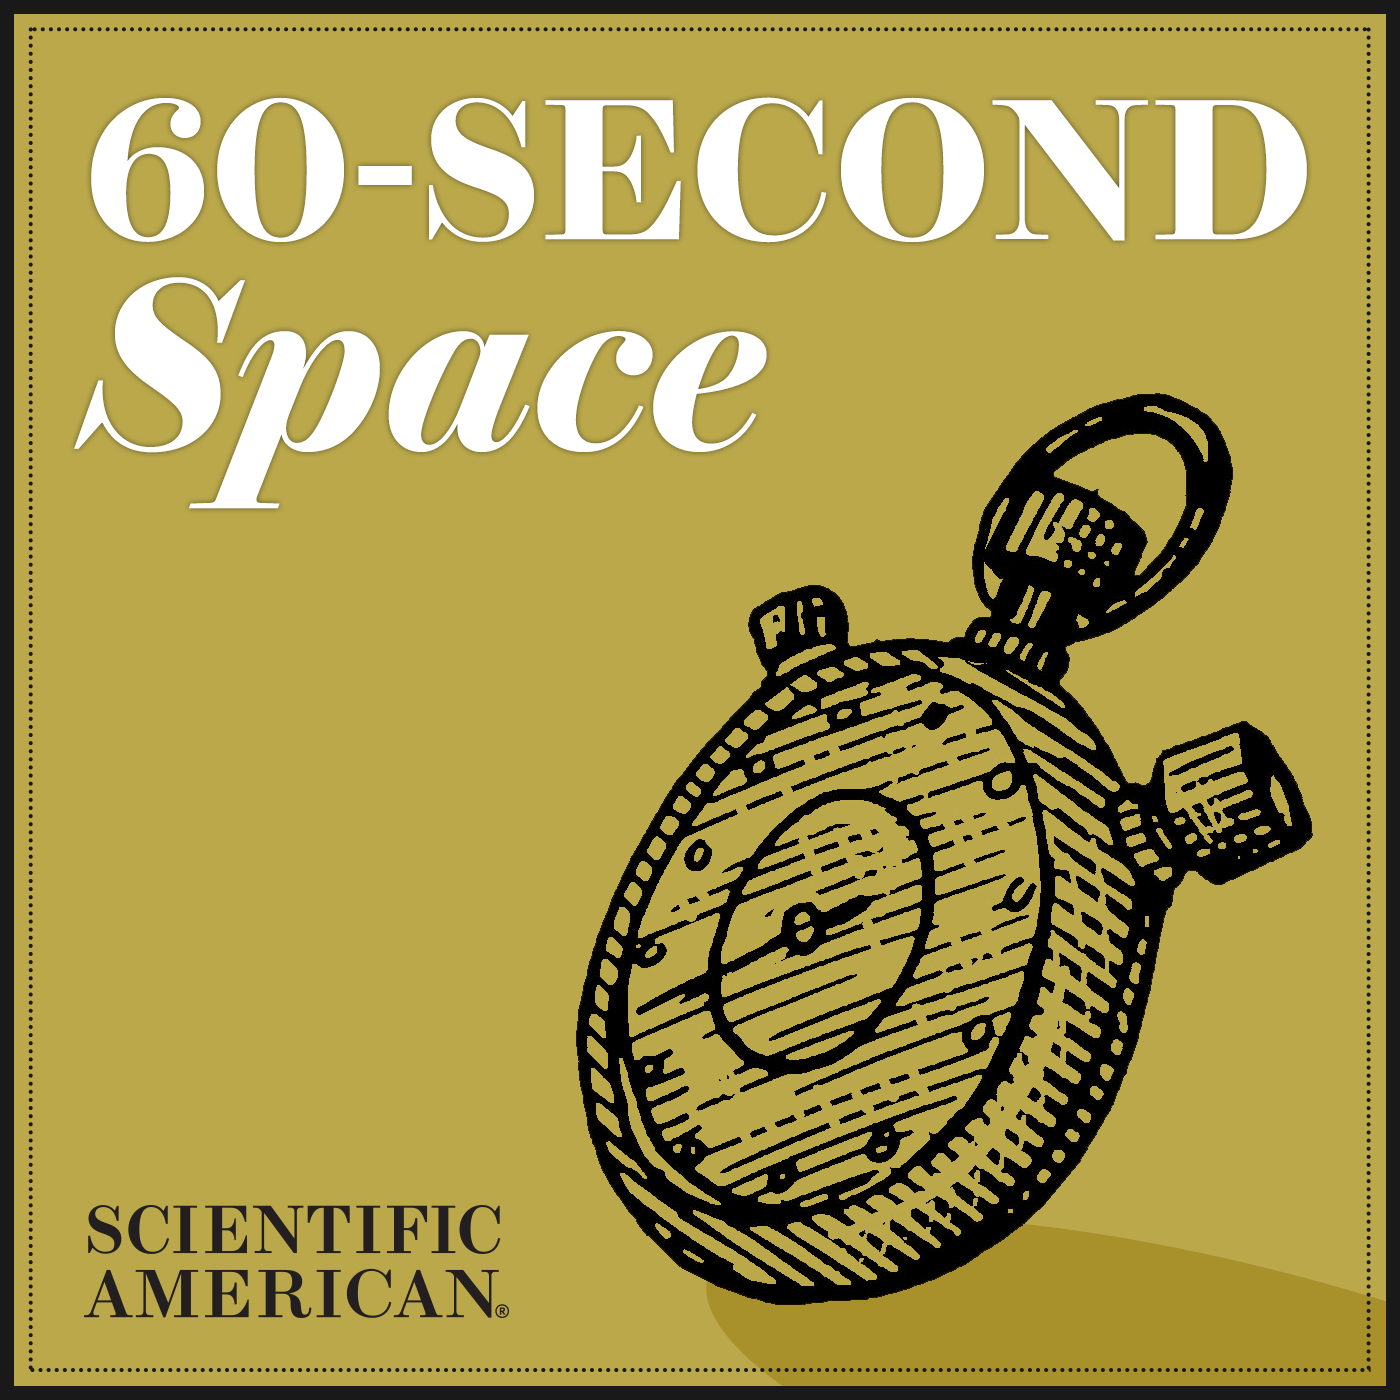 60-Second Space podcast